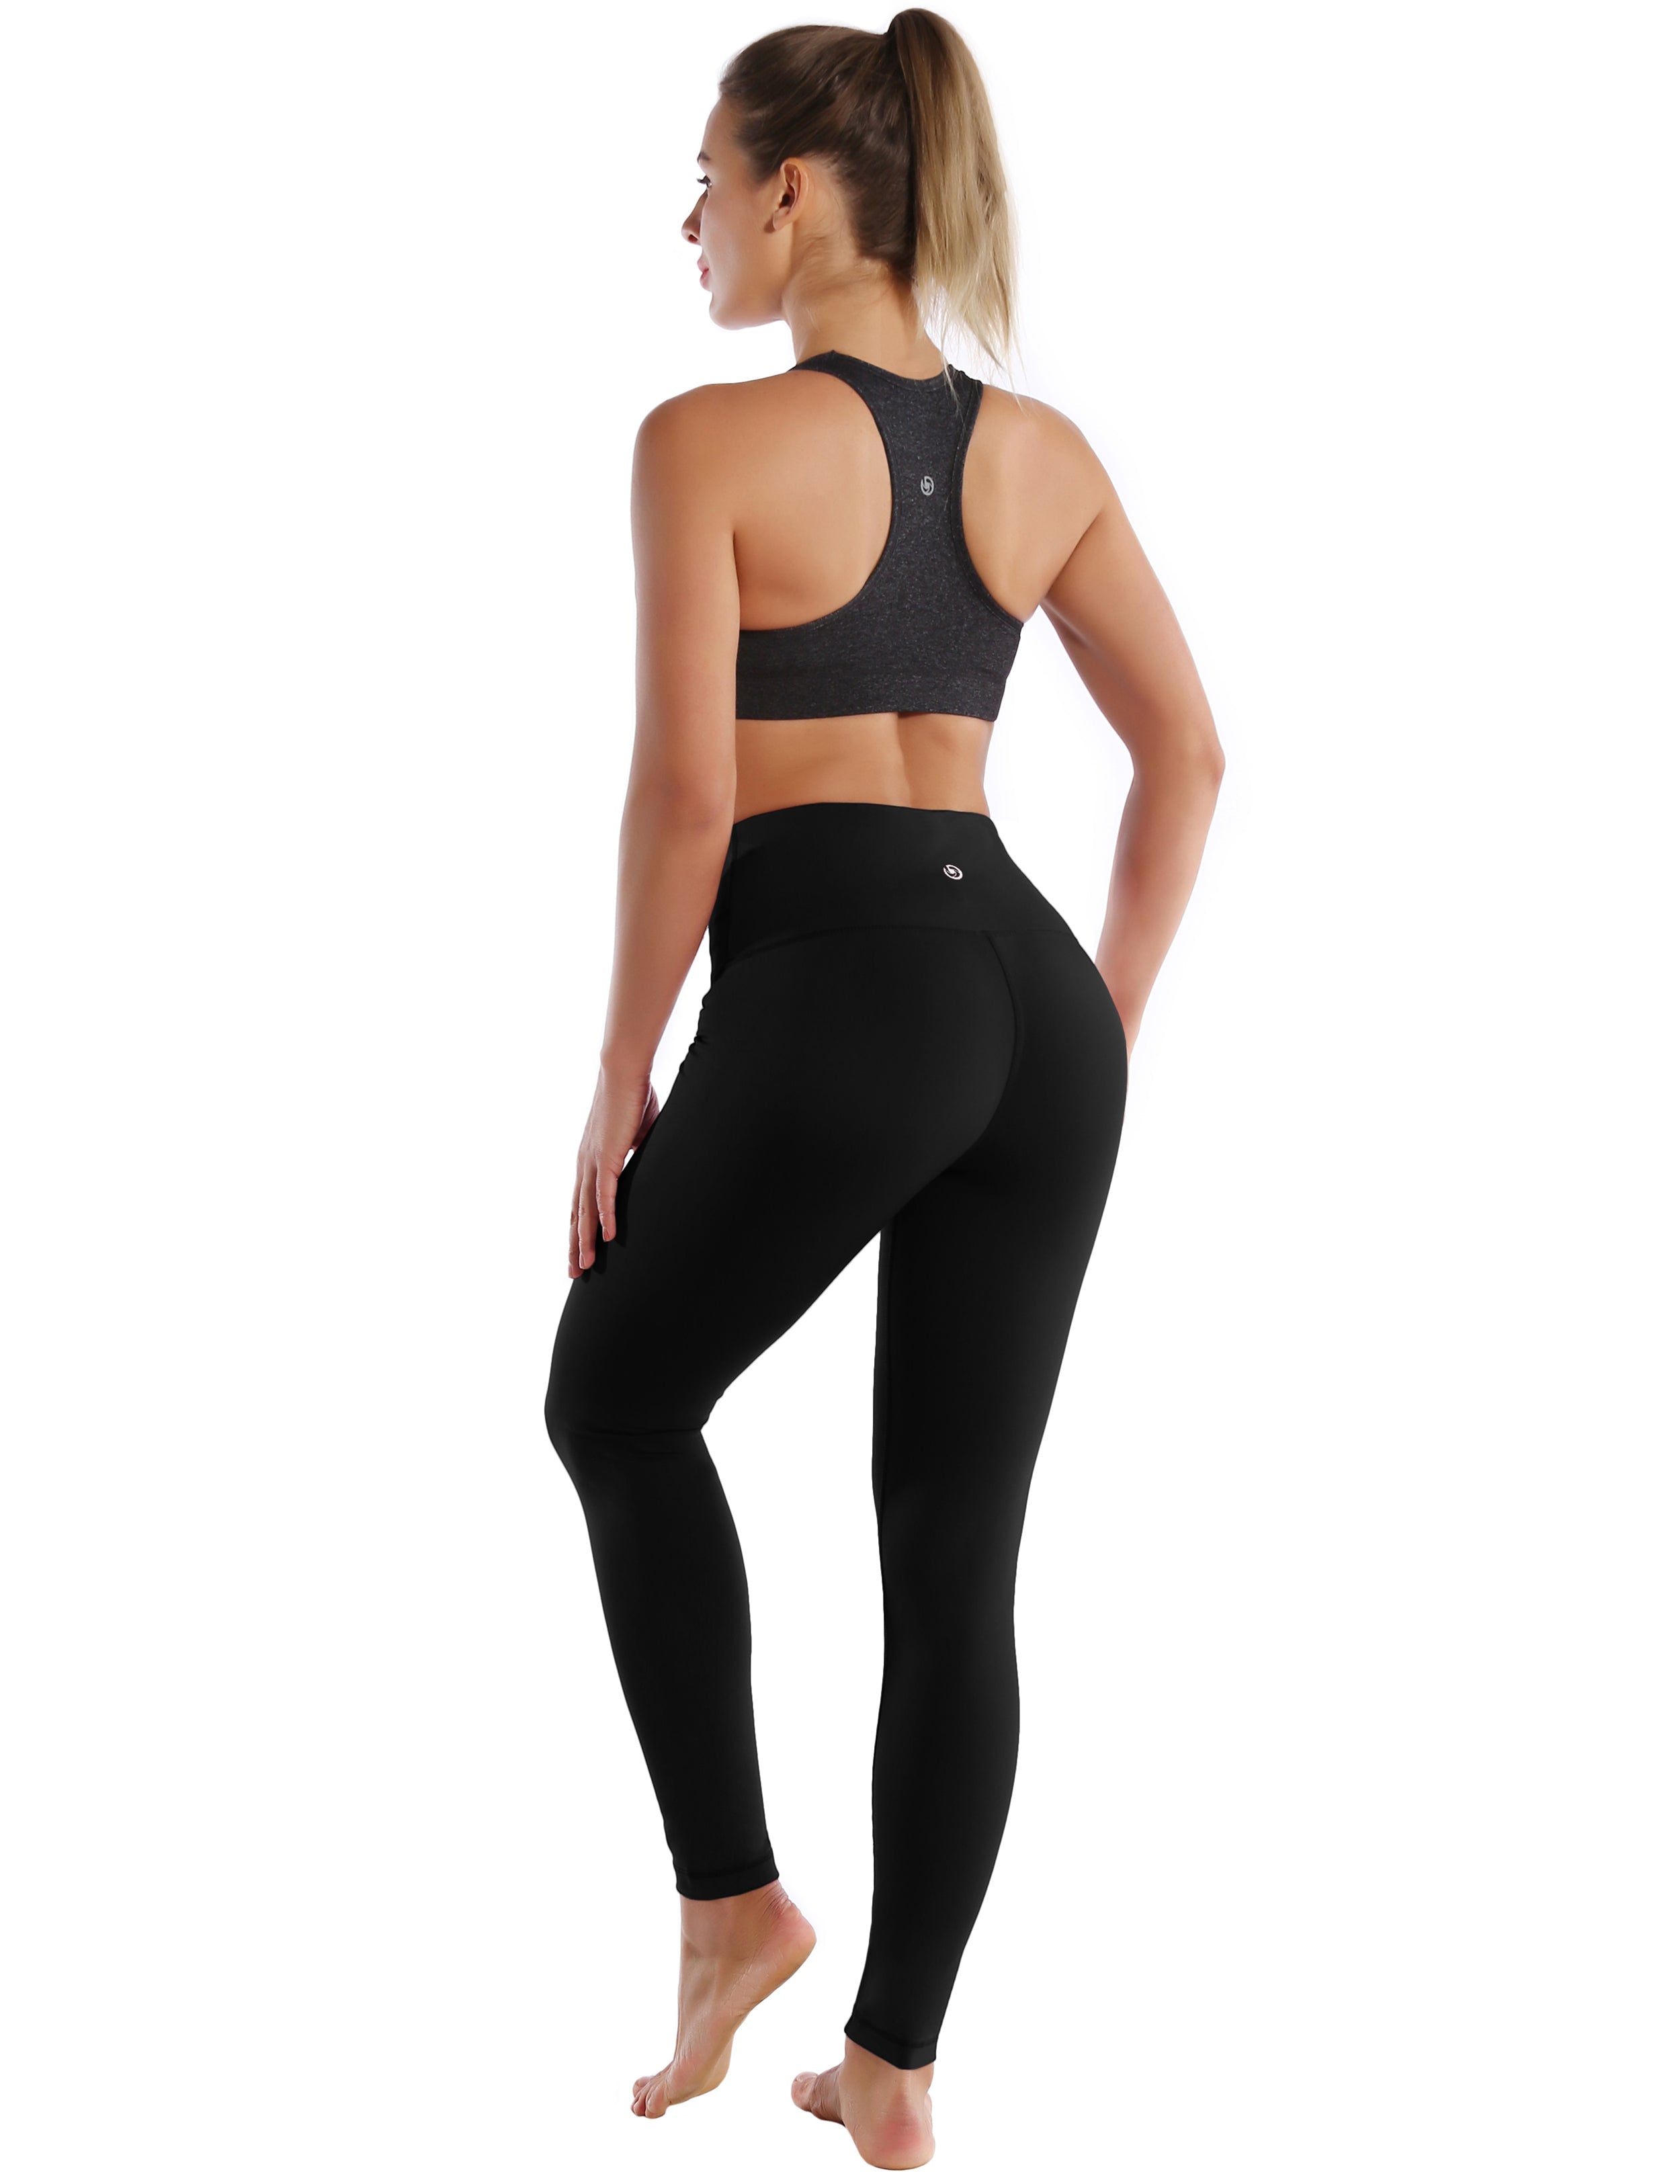 High Waist Biking Pants black 75%Nylon/25%Spandex Fabric doesn't attract lint easily 4-way stretch No see-through Moisture-wicking Tummy control Inner pocket Four lengths